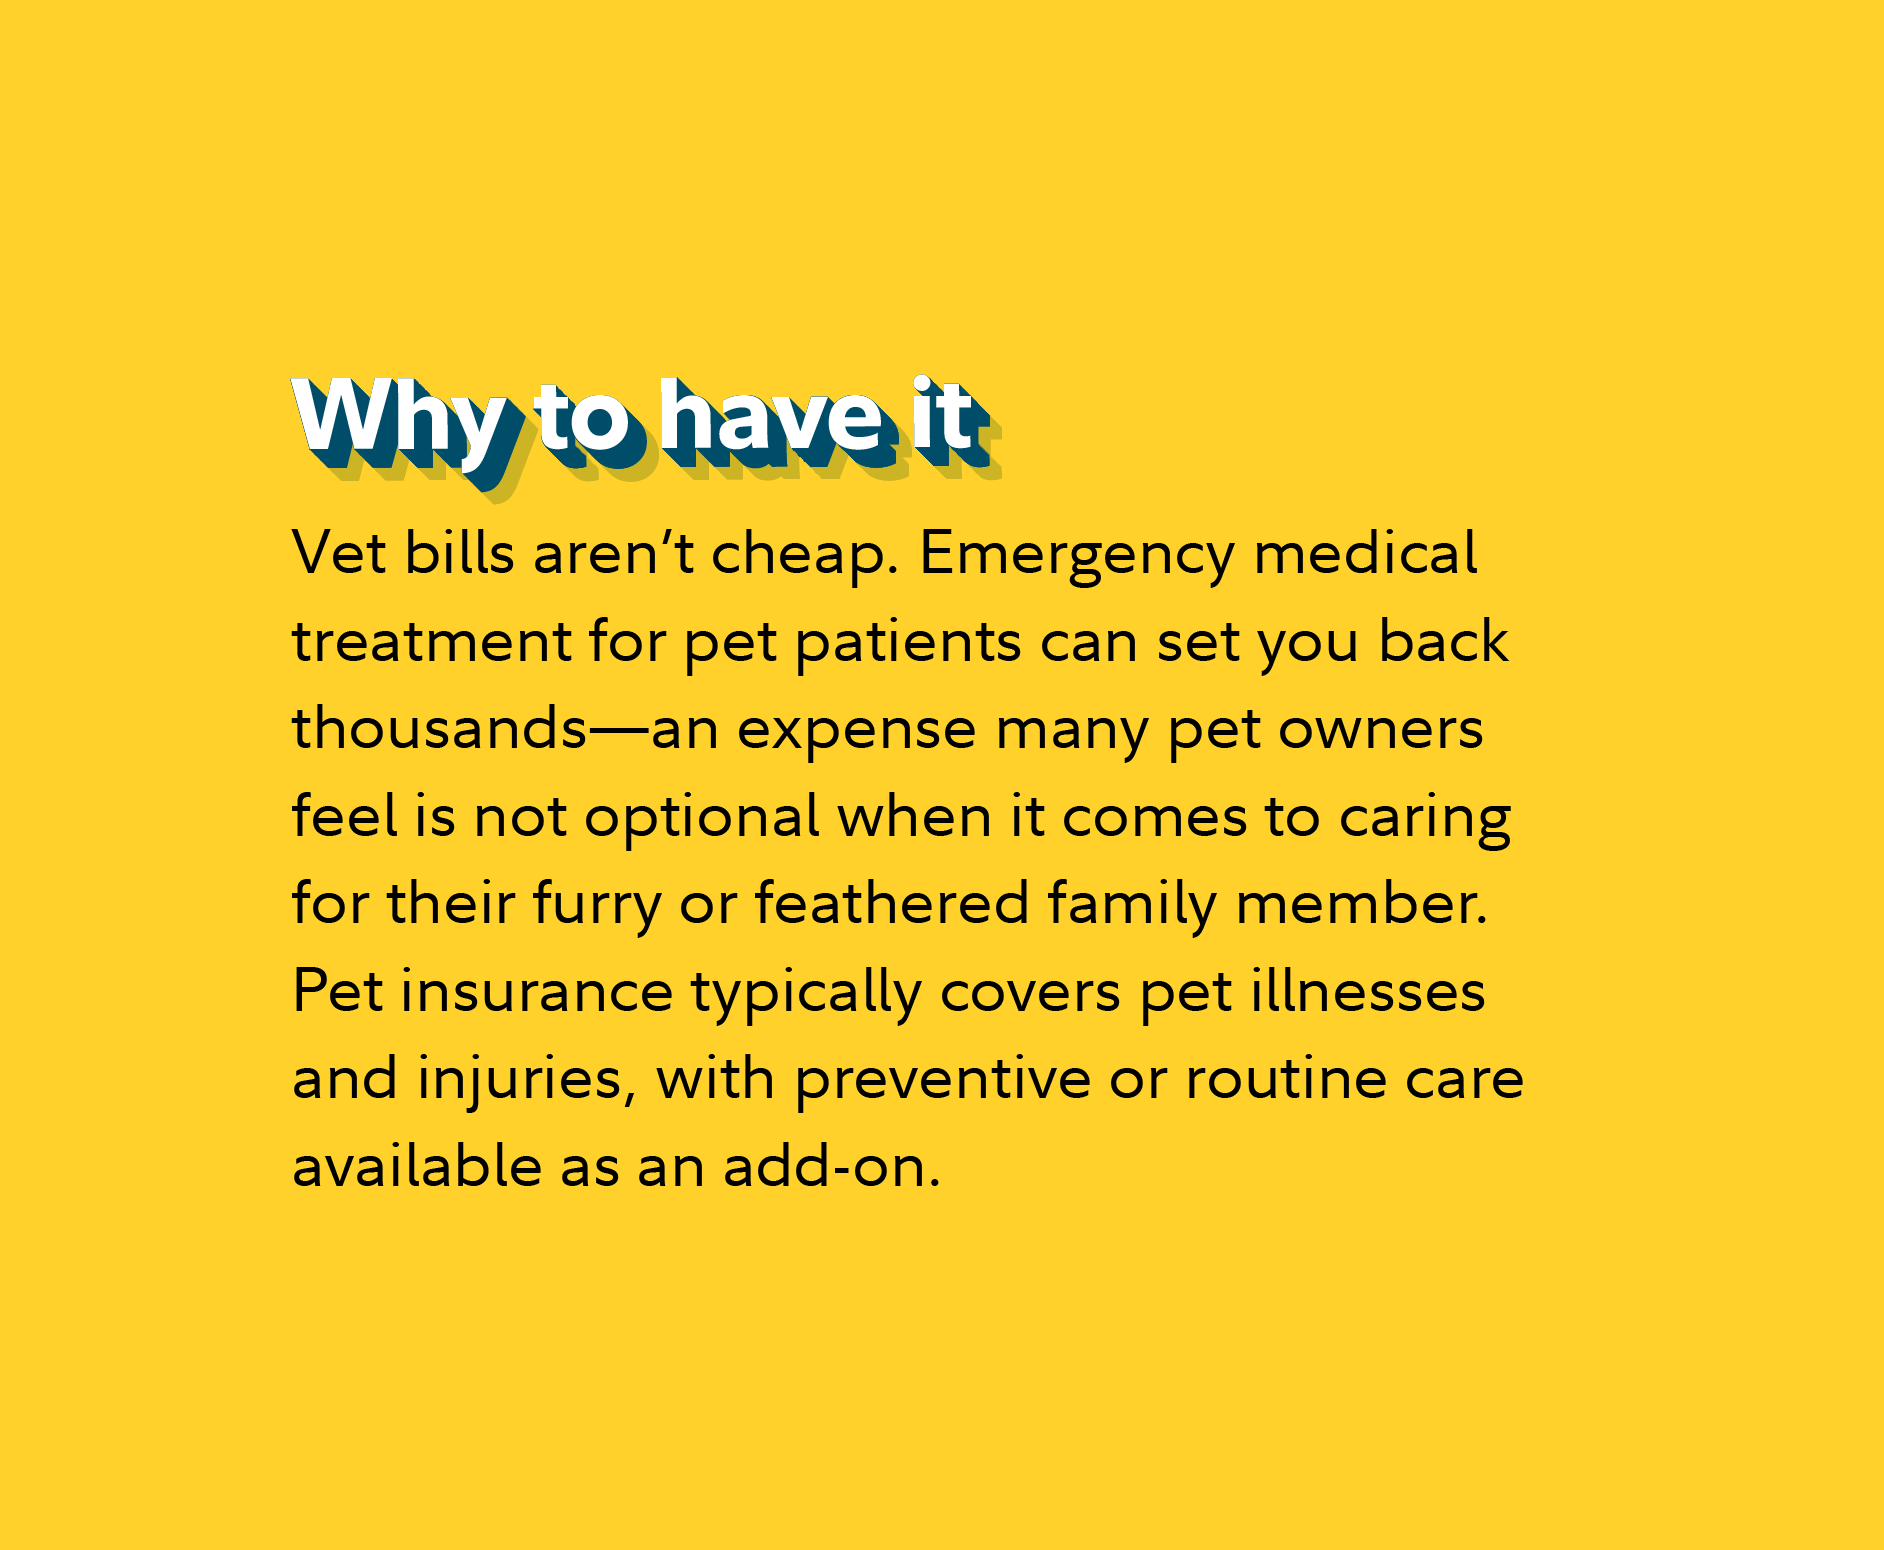 Why to have it Vet bills aren’t cheap. Emergency medical treatment for pet patients can set you back thousands—an expense many pet owners feel is not optional when it comes to caring for their furry or feathered family member. Pet insurance typically covers pet illnesses and injuries, with preventive or routine care available as an add-on.